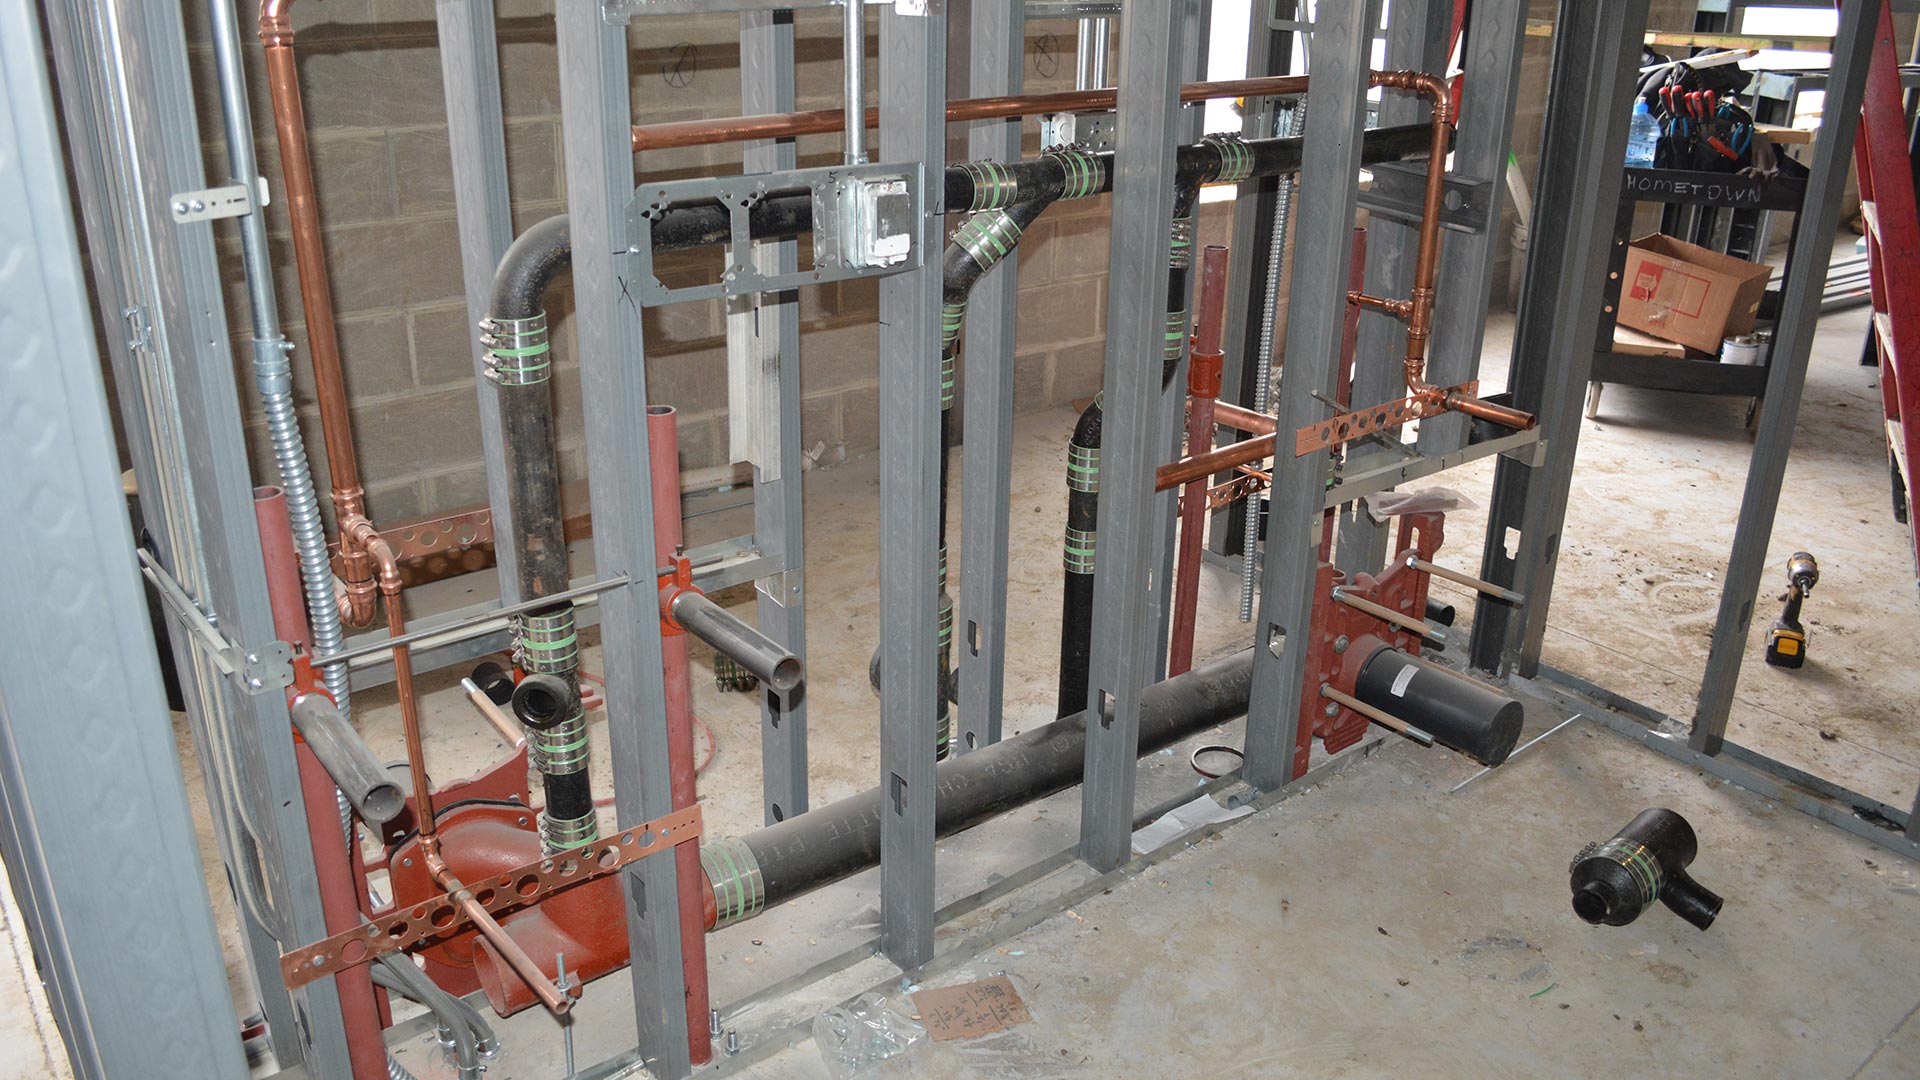 Hometown Plumbing and Heating Quad Cities Iowa Projects Jefferson Elementary School piping